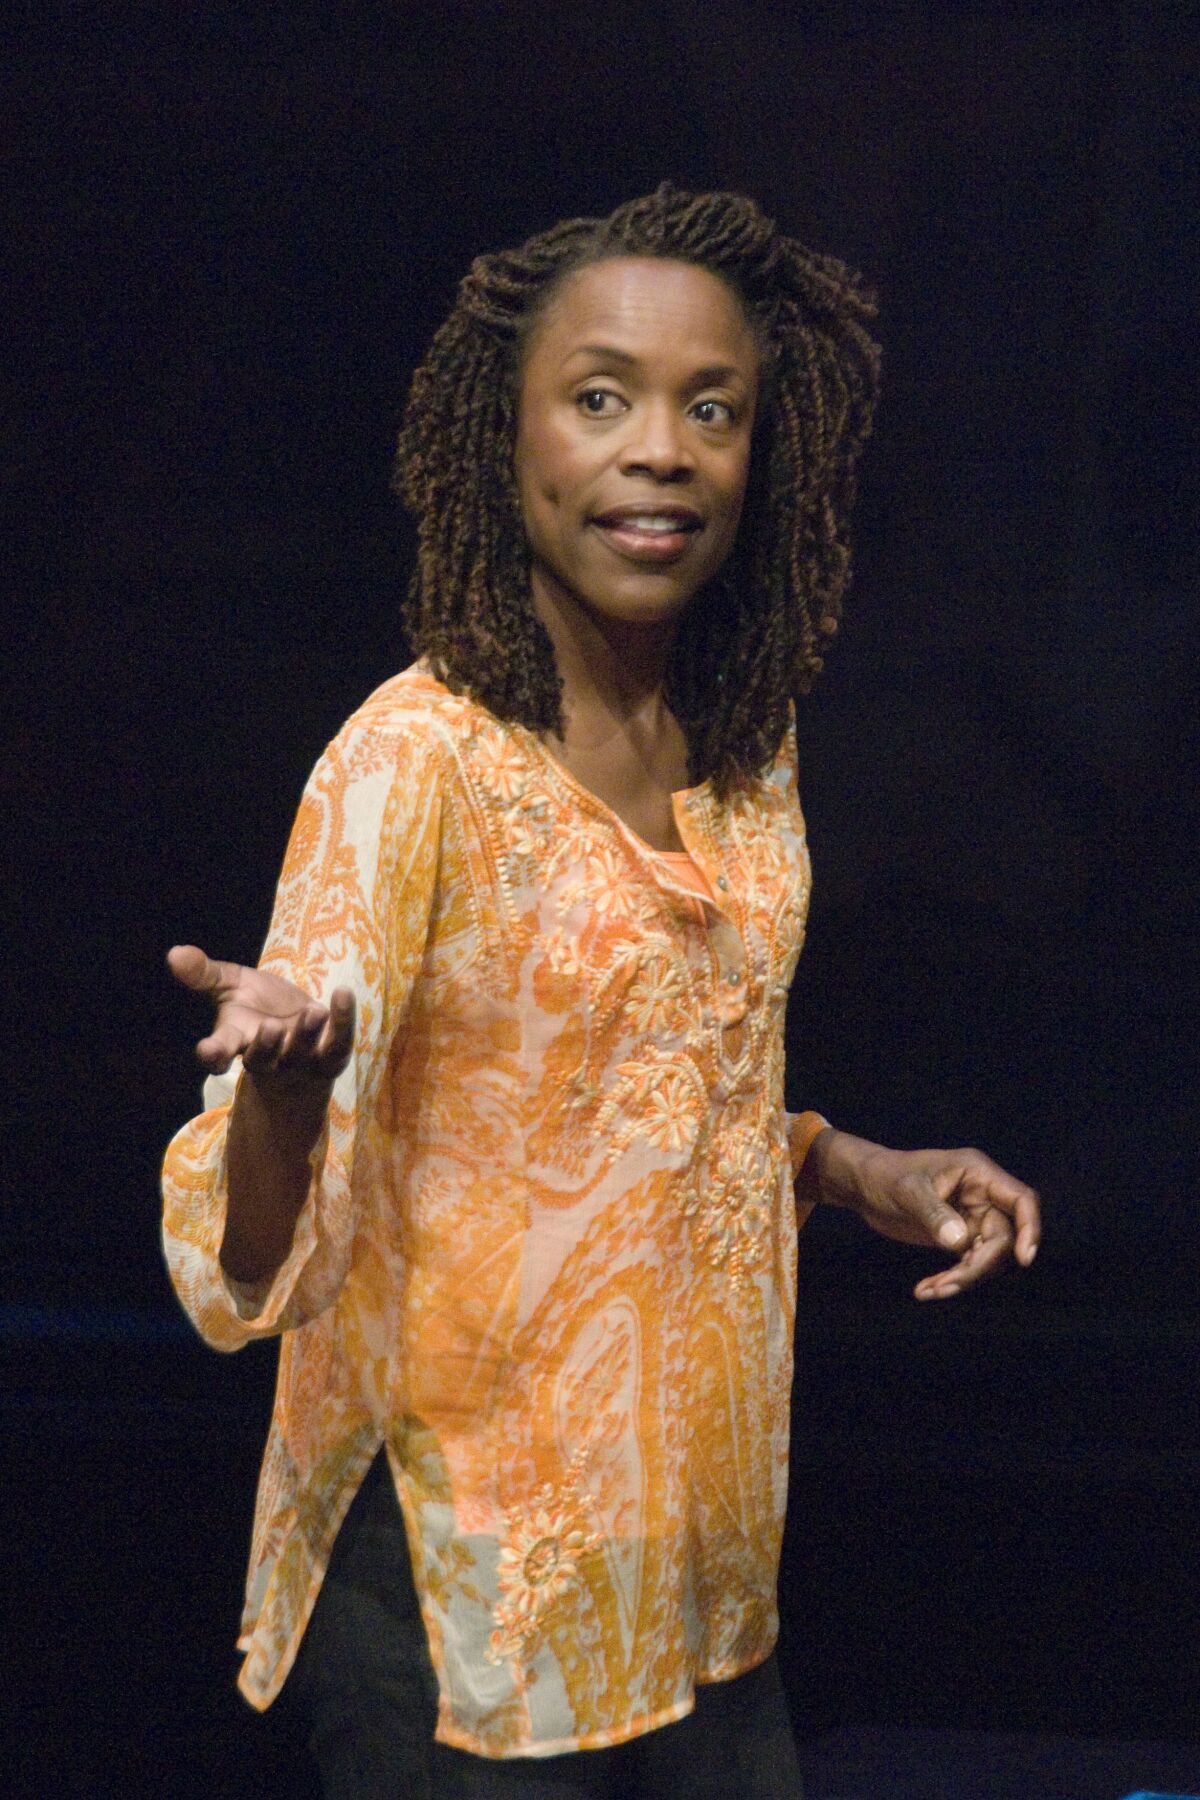 Charlayne Woodard in her solo play "The Night Watcher" at La Jolla Playhouse in 2008.